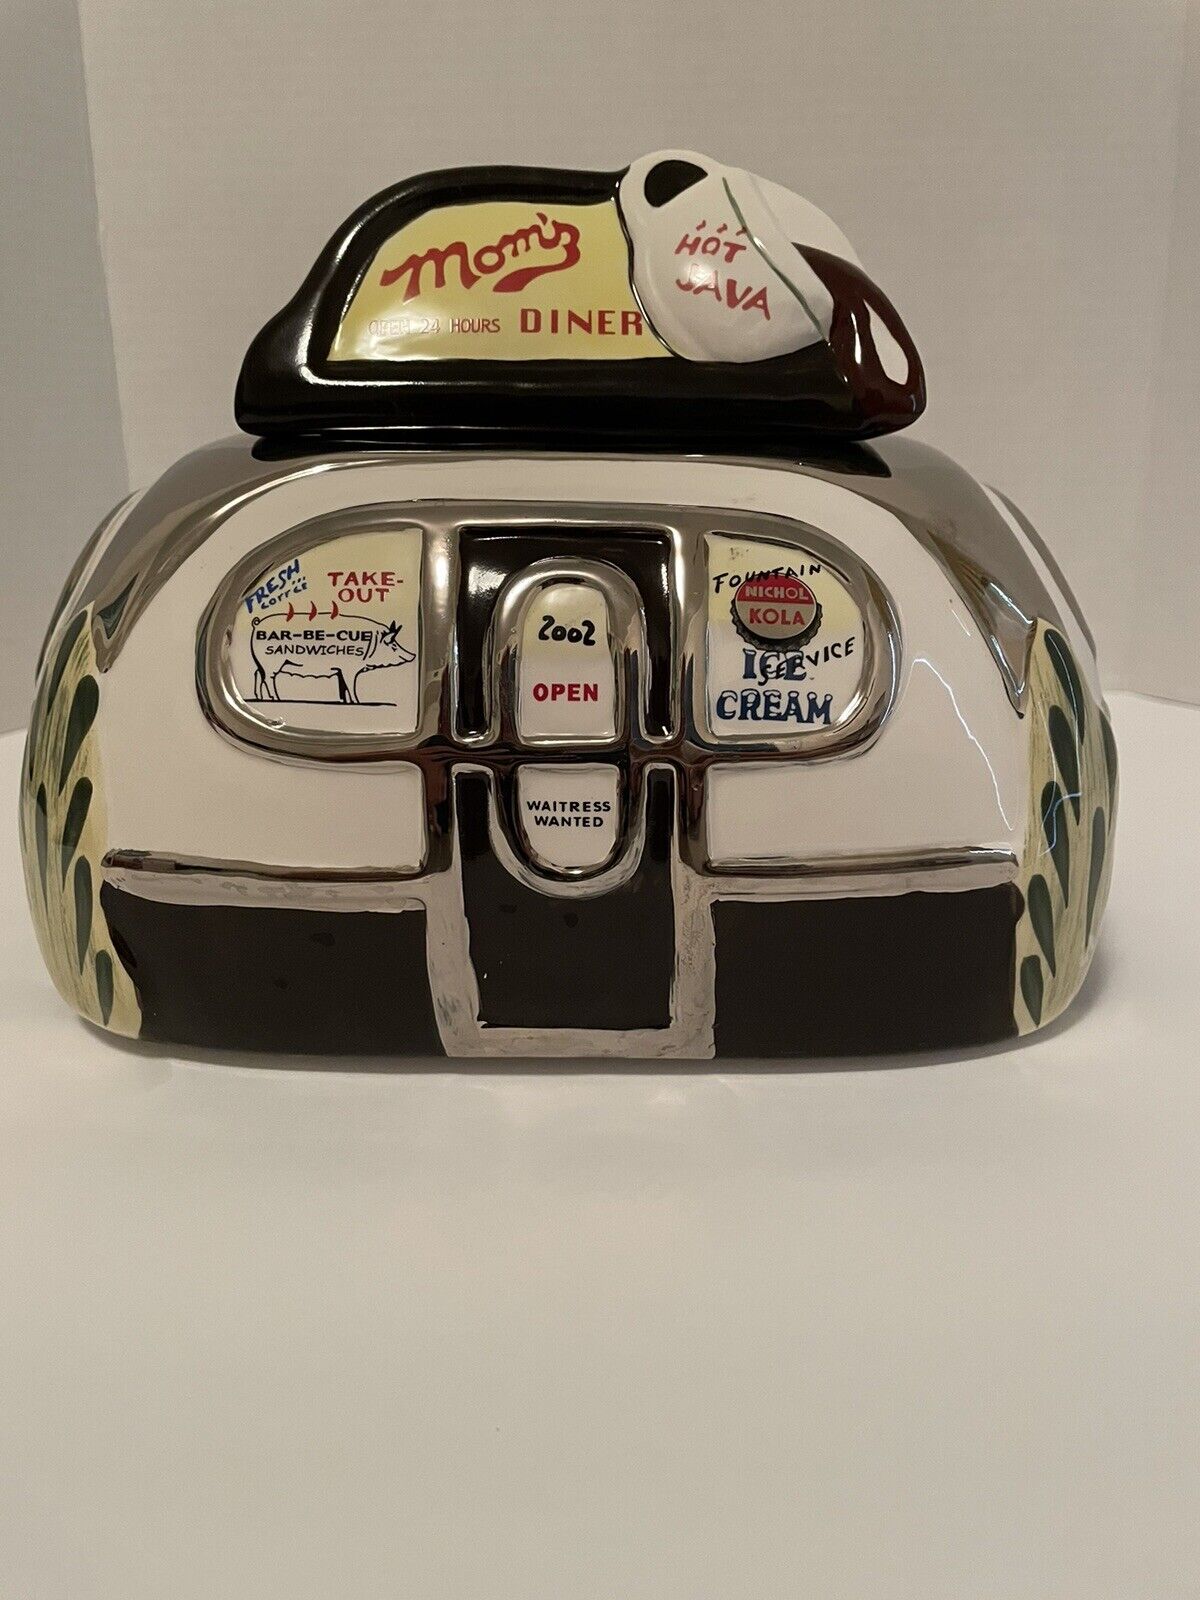 HENRY CAVANAGH MOM’S DINER RETRO CERAMIC COOKIE JAR OPEN 24 HOURS WITH HOT JAVA